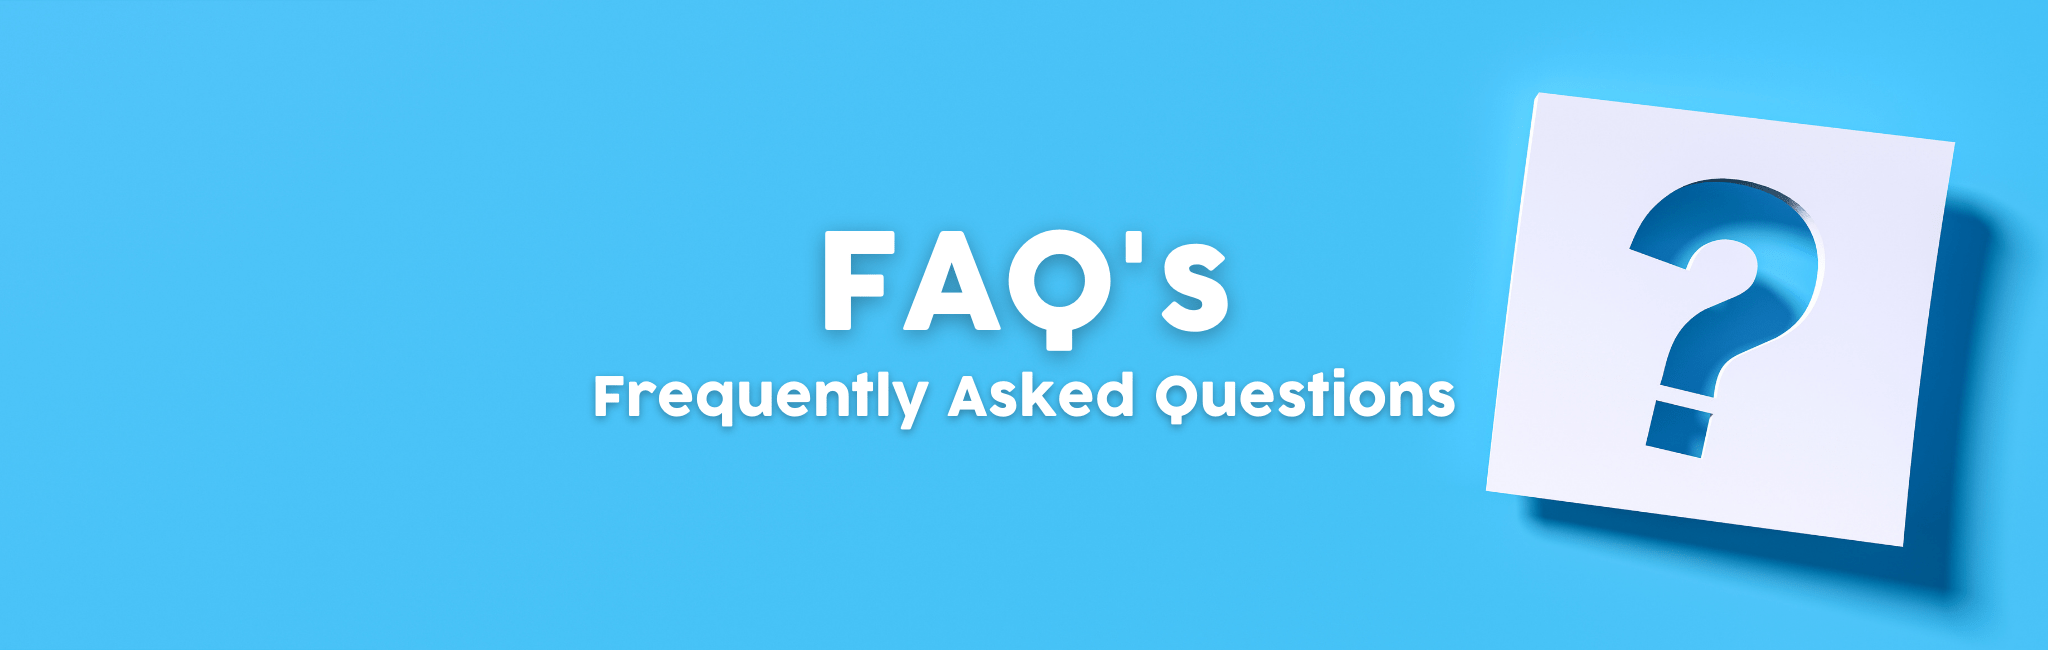 FAQ's - Frequently Asked Questions.